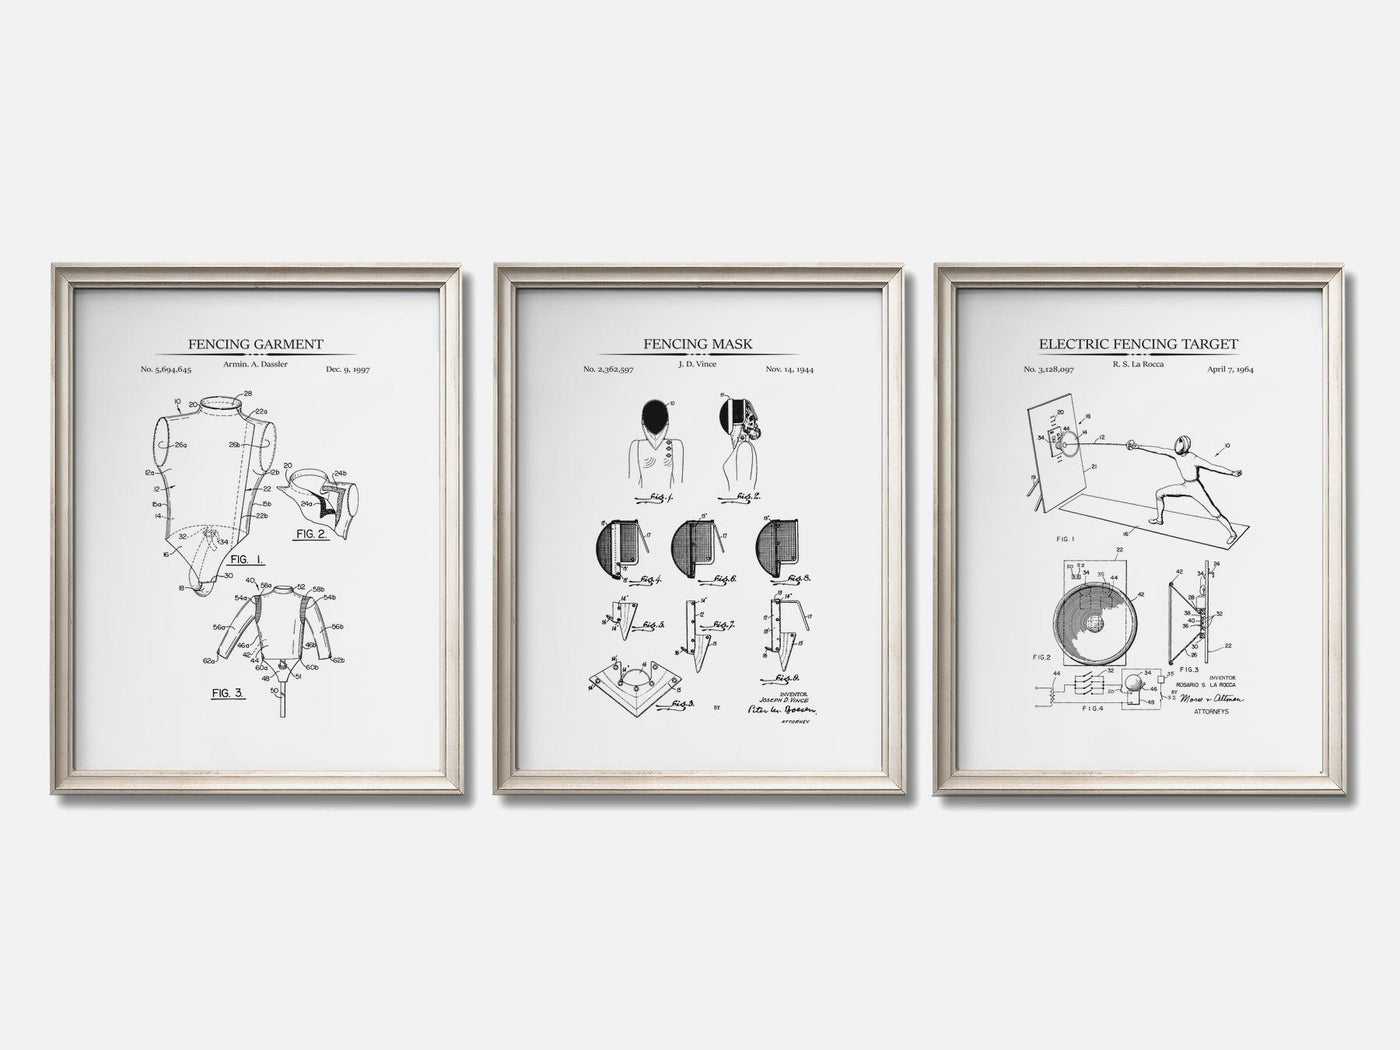 Fencing Patent Print Set of 3 mockup - A_t10080-V1-PC_F+O-SS_3-PS_11x14-C_whi variant